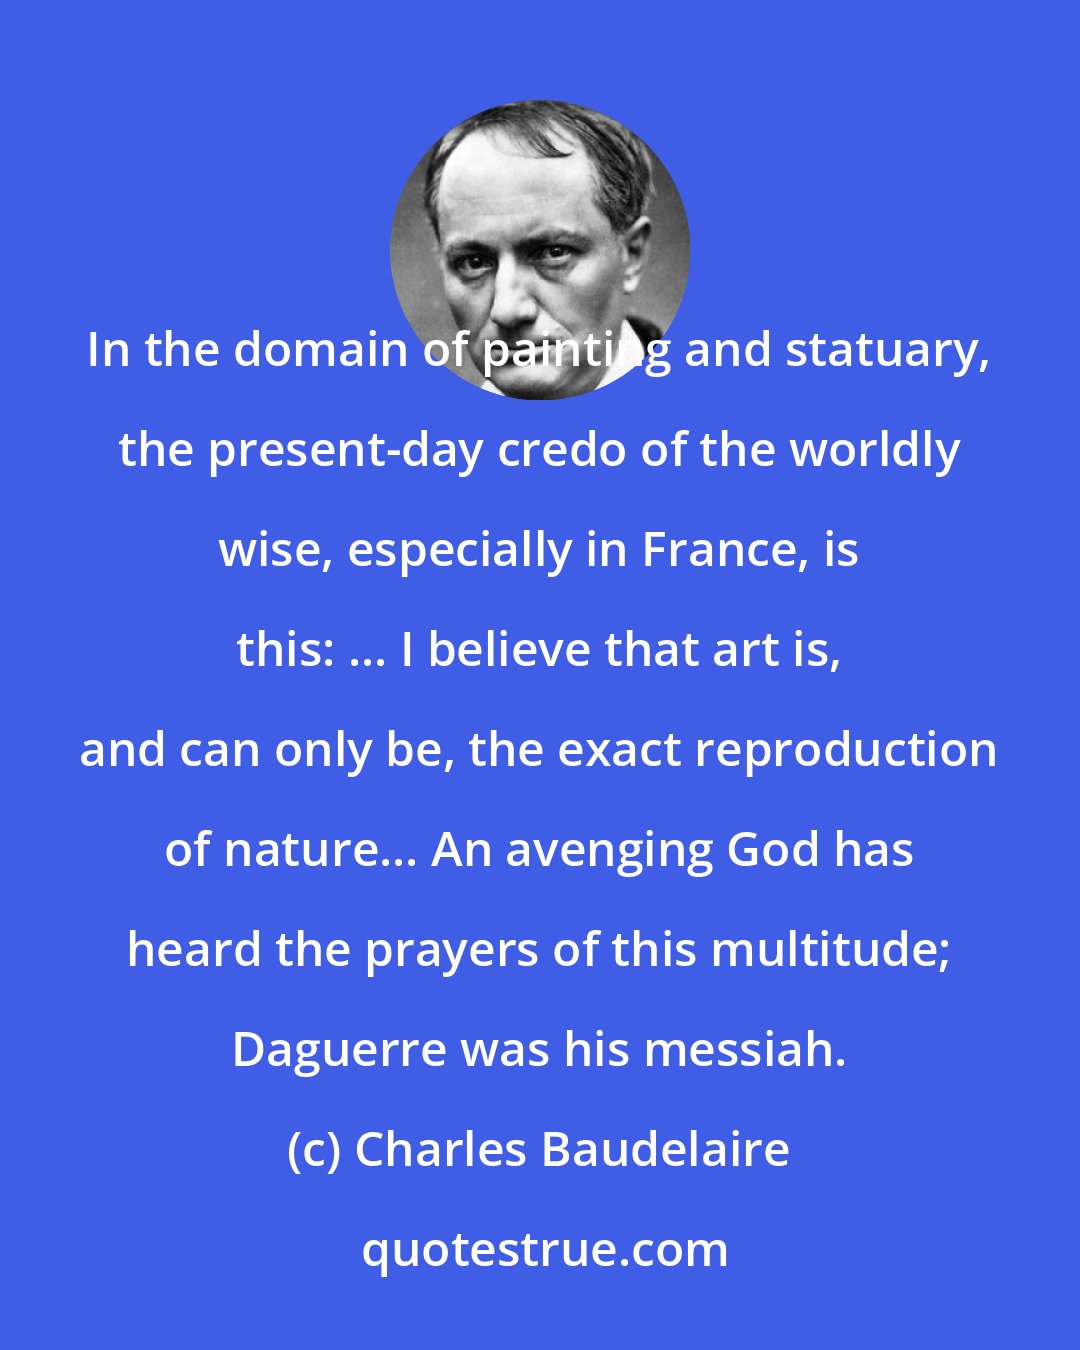 Charles Baudelaire: In the domain of painting and statuary, the present-day credo of the worldly wise, especially in France, is this: ... I believe that art is, and can only be, the exact reproduction of nature... An avenging God has heard the prayers of this multitude; Daguerre was his messiah.